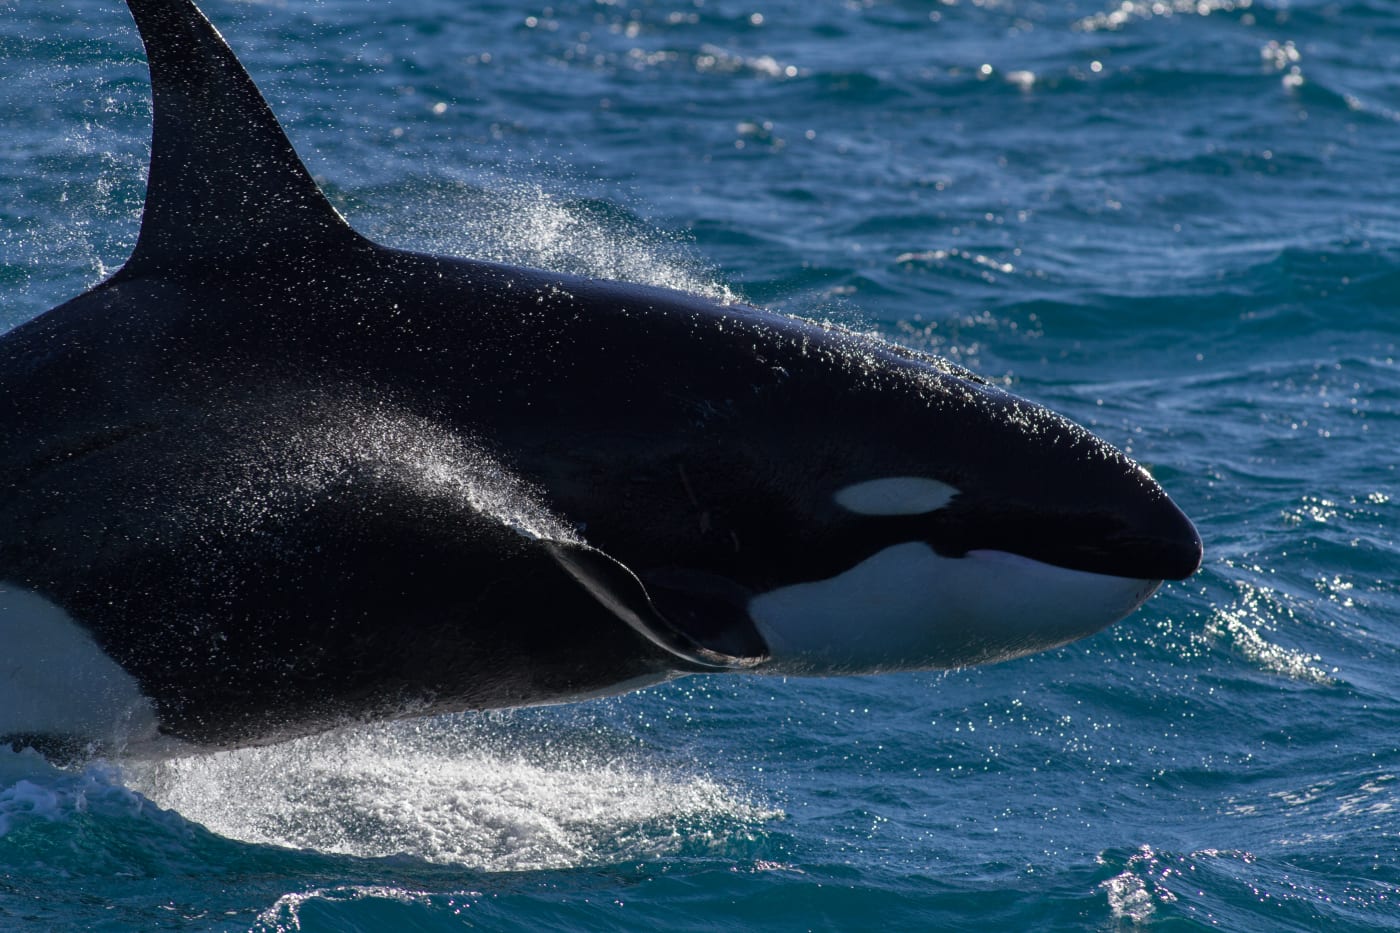 Male Orca breaching powerfully while on the hunt